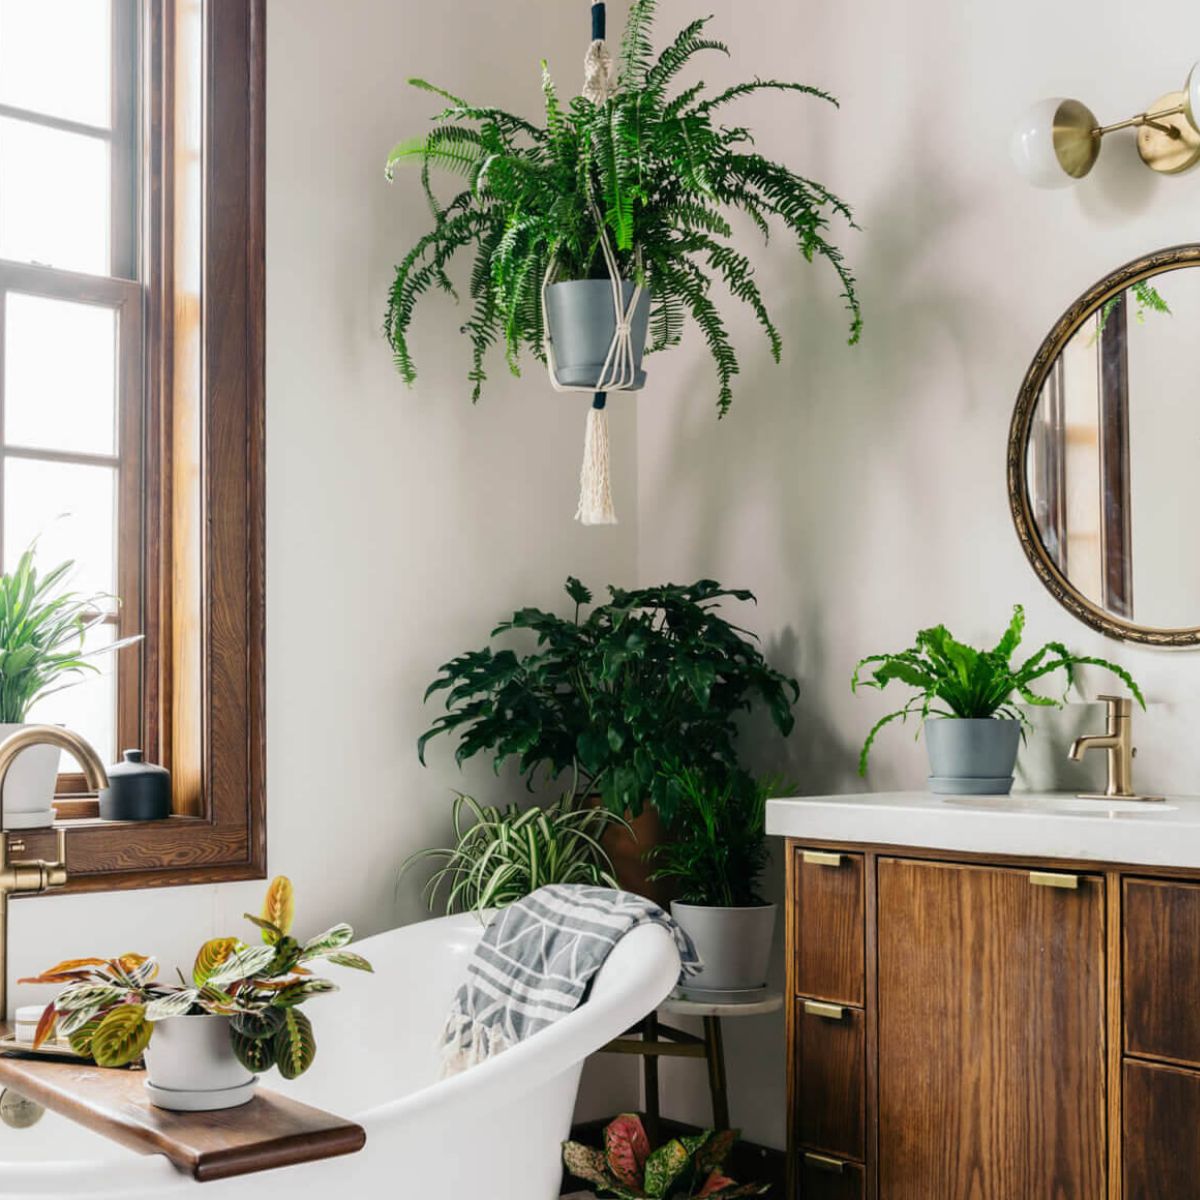 Adding plants in bathroom for interior decoration is a great way of adding more life to spaces on Thursd